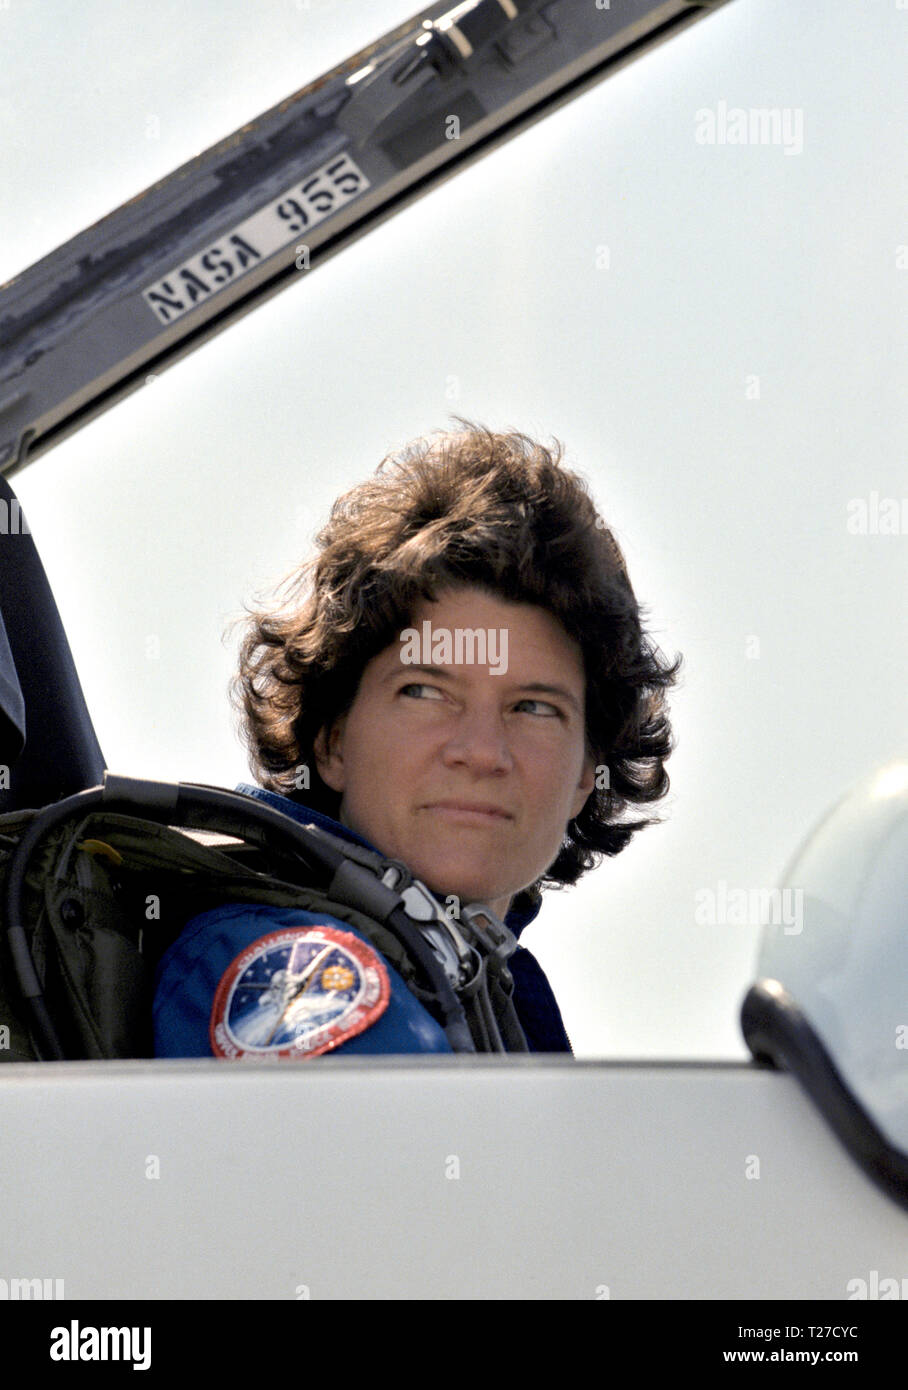 (2 Oct 1984) --- Astronaut Sally K. Ride, 41-G mission specialist, gets a last look of Houston from the ground prior to departing the area in a T-38 jet aircraft to begin preparations in Florida for her 41-G space mission later in the week. Stock Photo